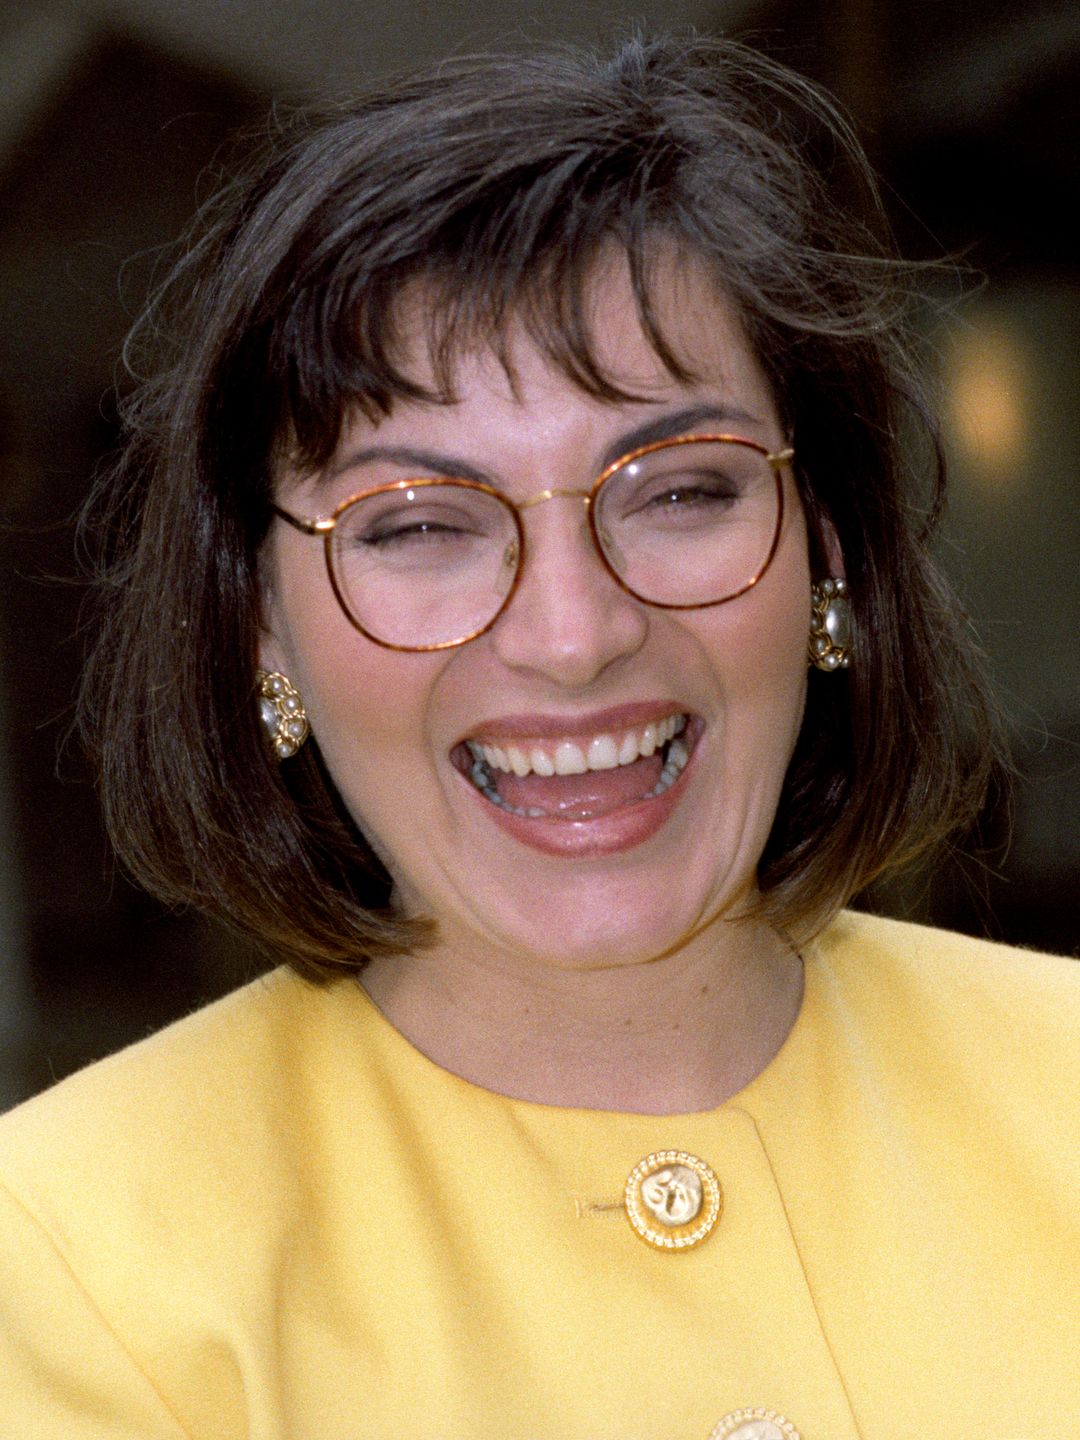 Lorraine Kelly laughing in a yellow top with short dark hair